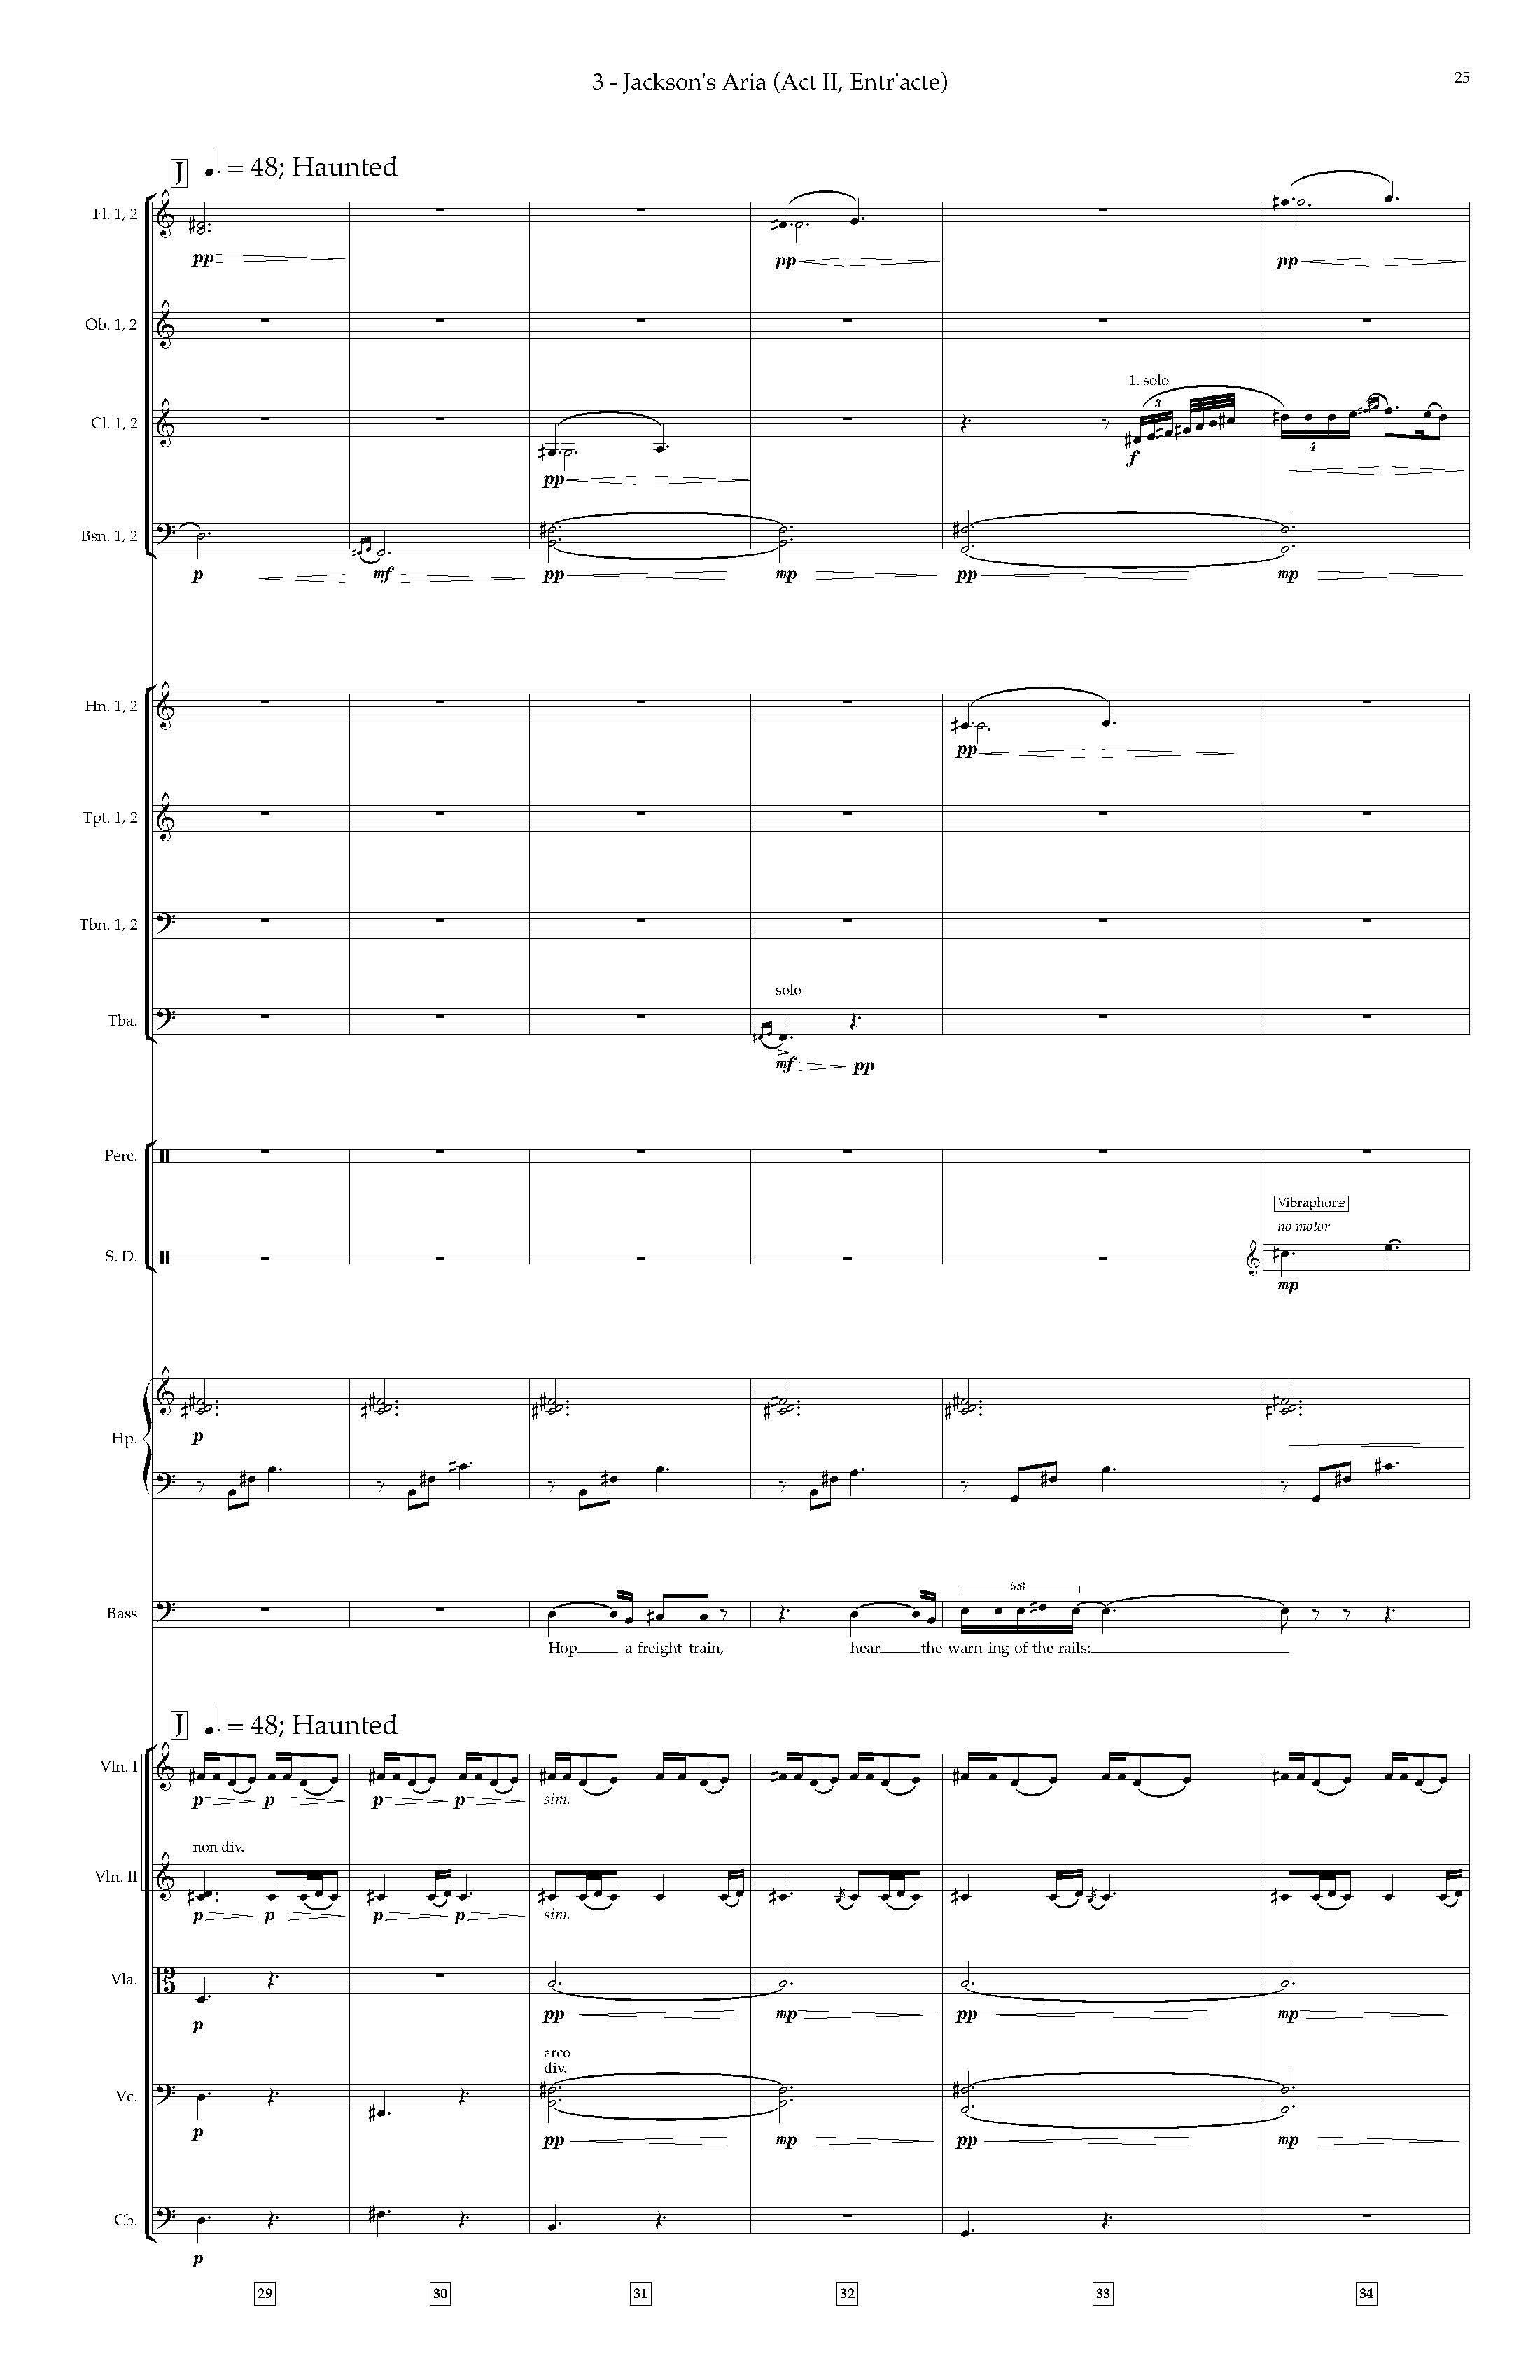 Arias and Interludes from HWGS - Complete Score_Page_31.jpg